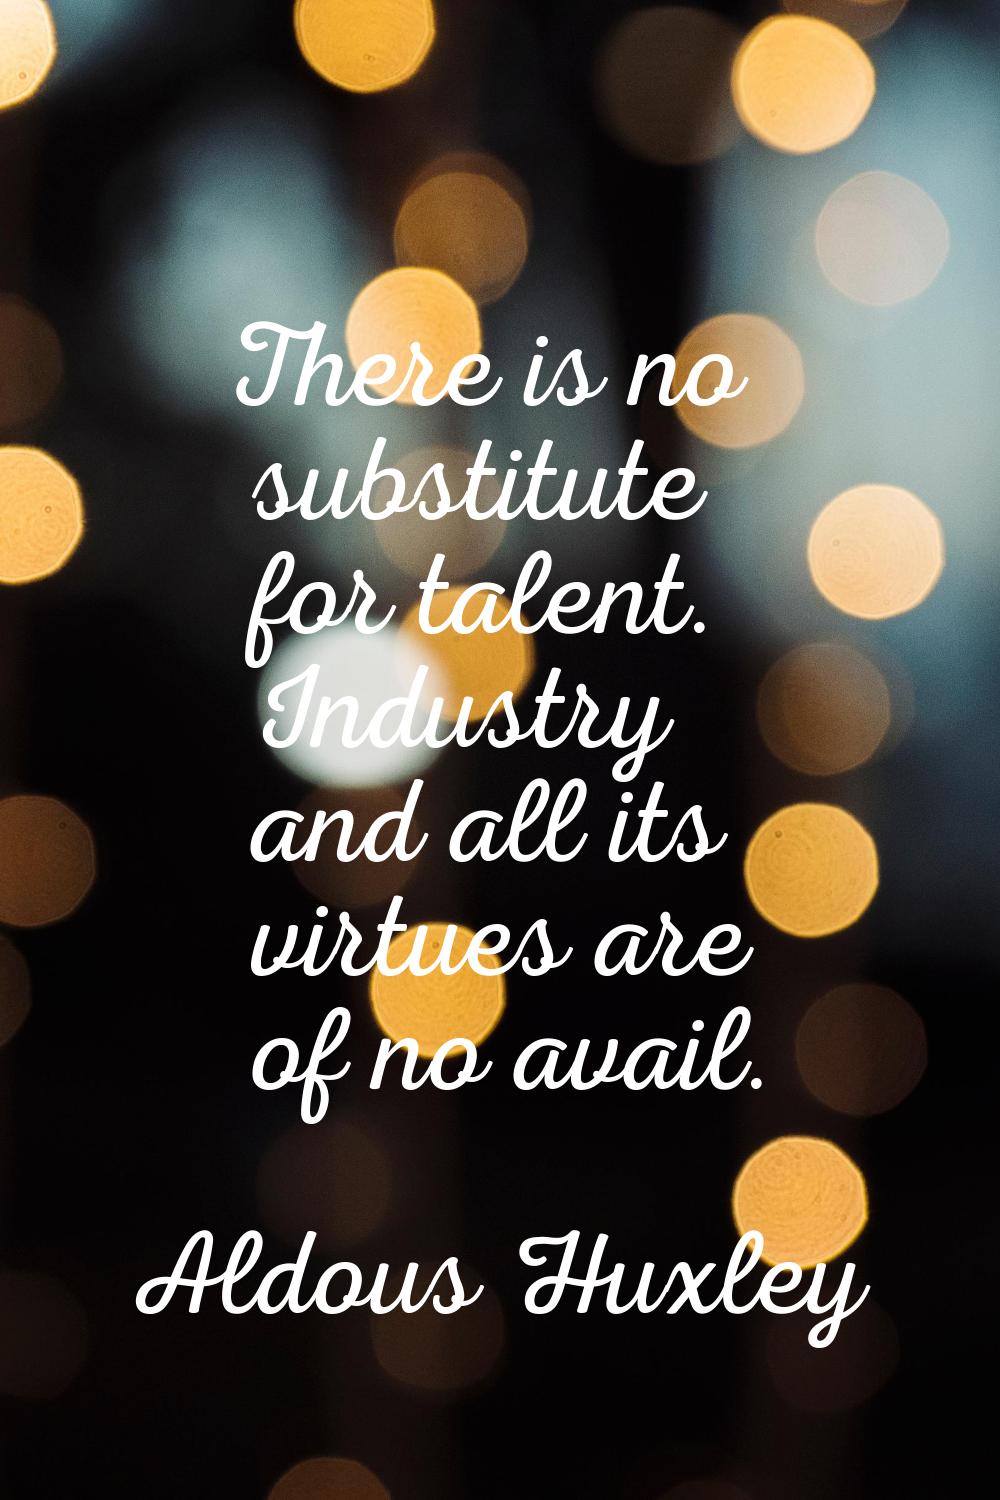 There is no substitute for talent. Industry and all its virtues are of no avail.